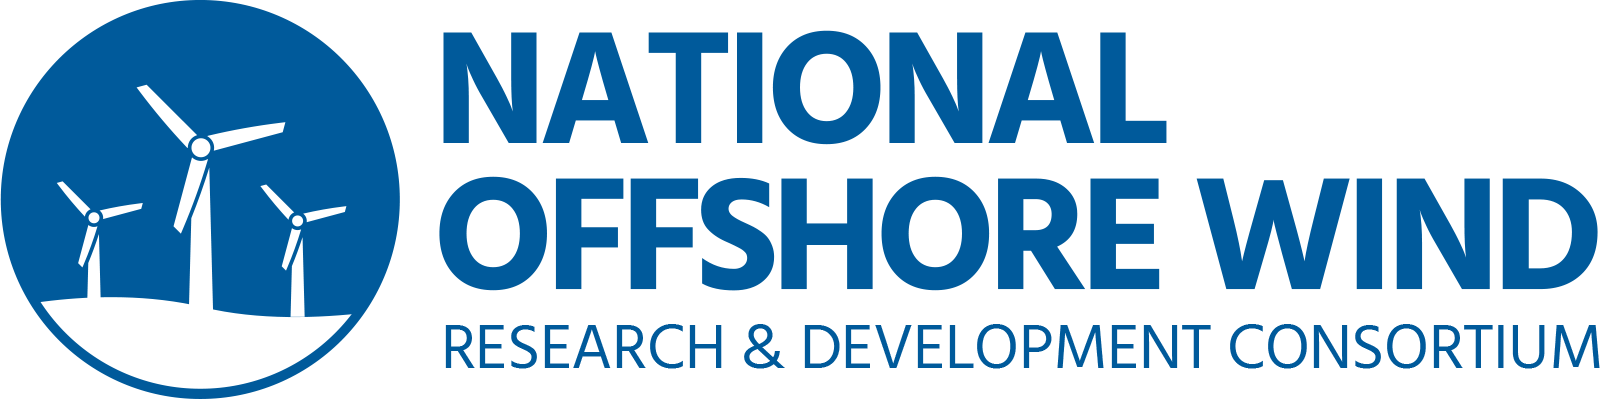 National Offshore Wind Logo